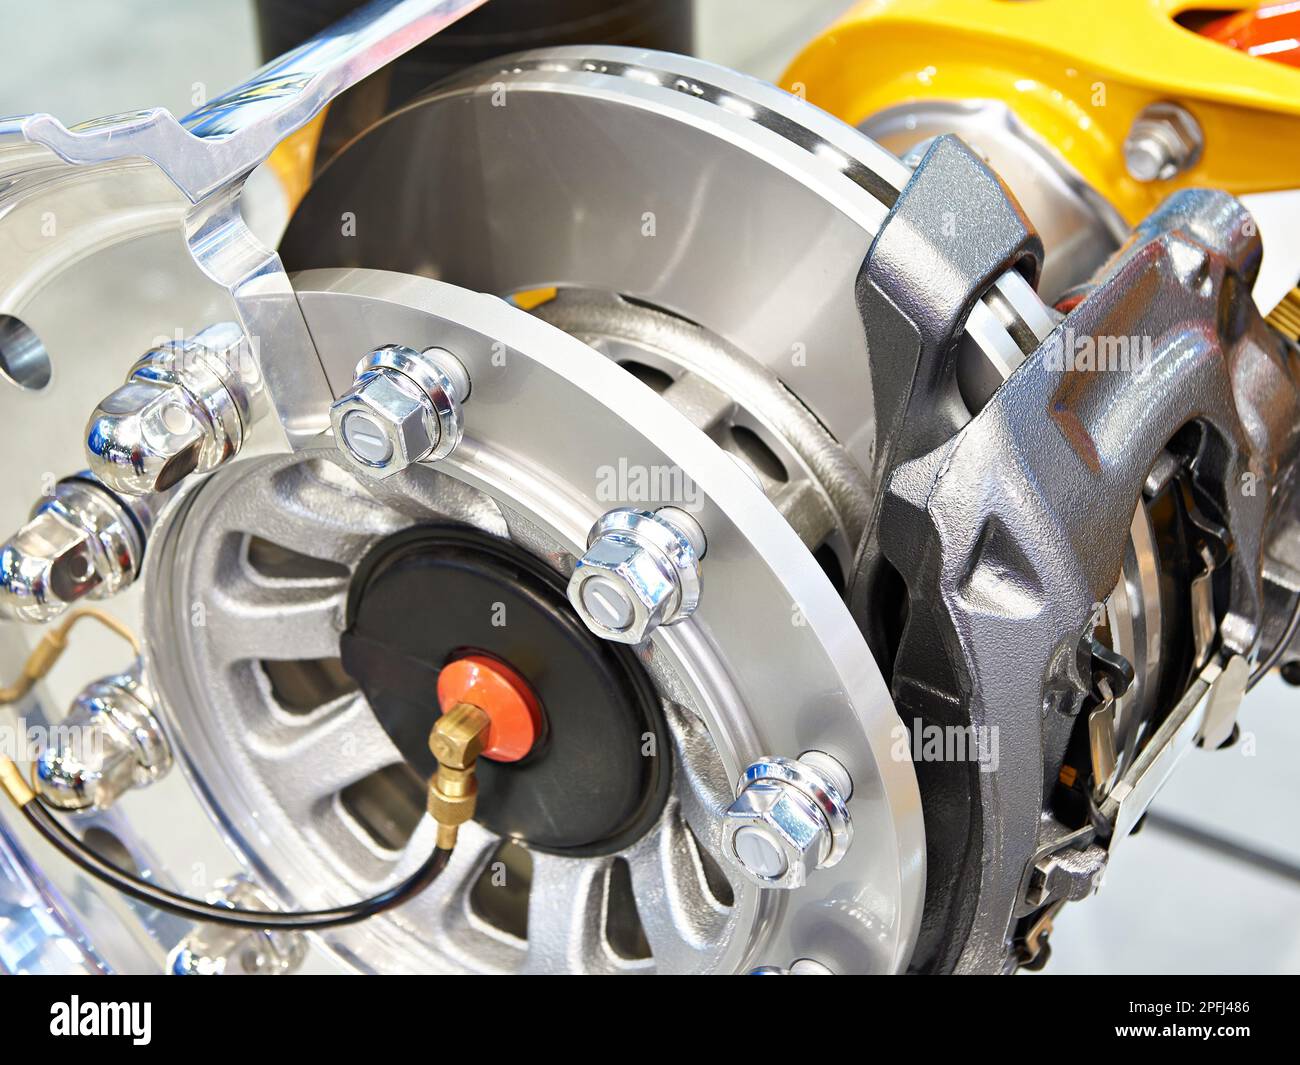 Wheel hub with disc brakes cross section Stock Photo